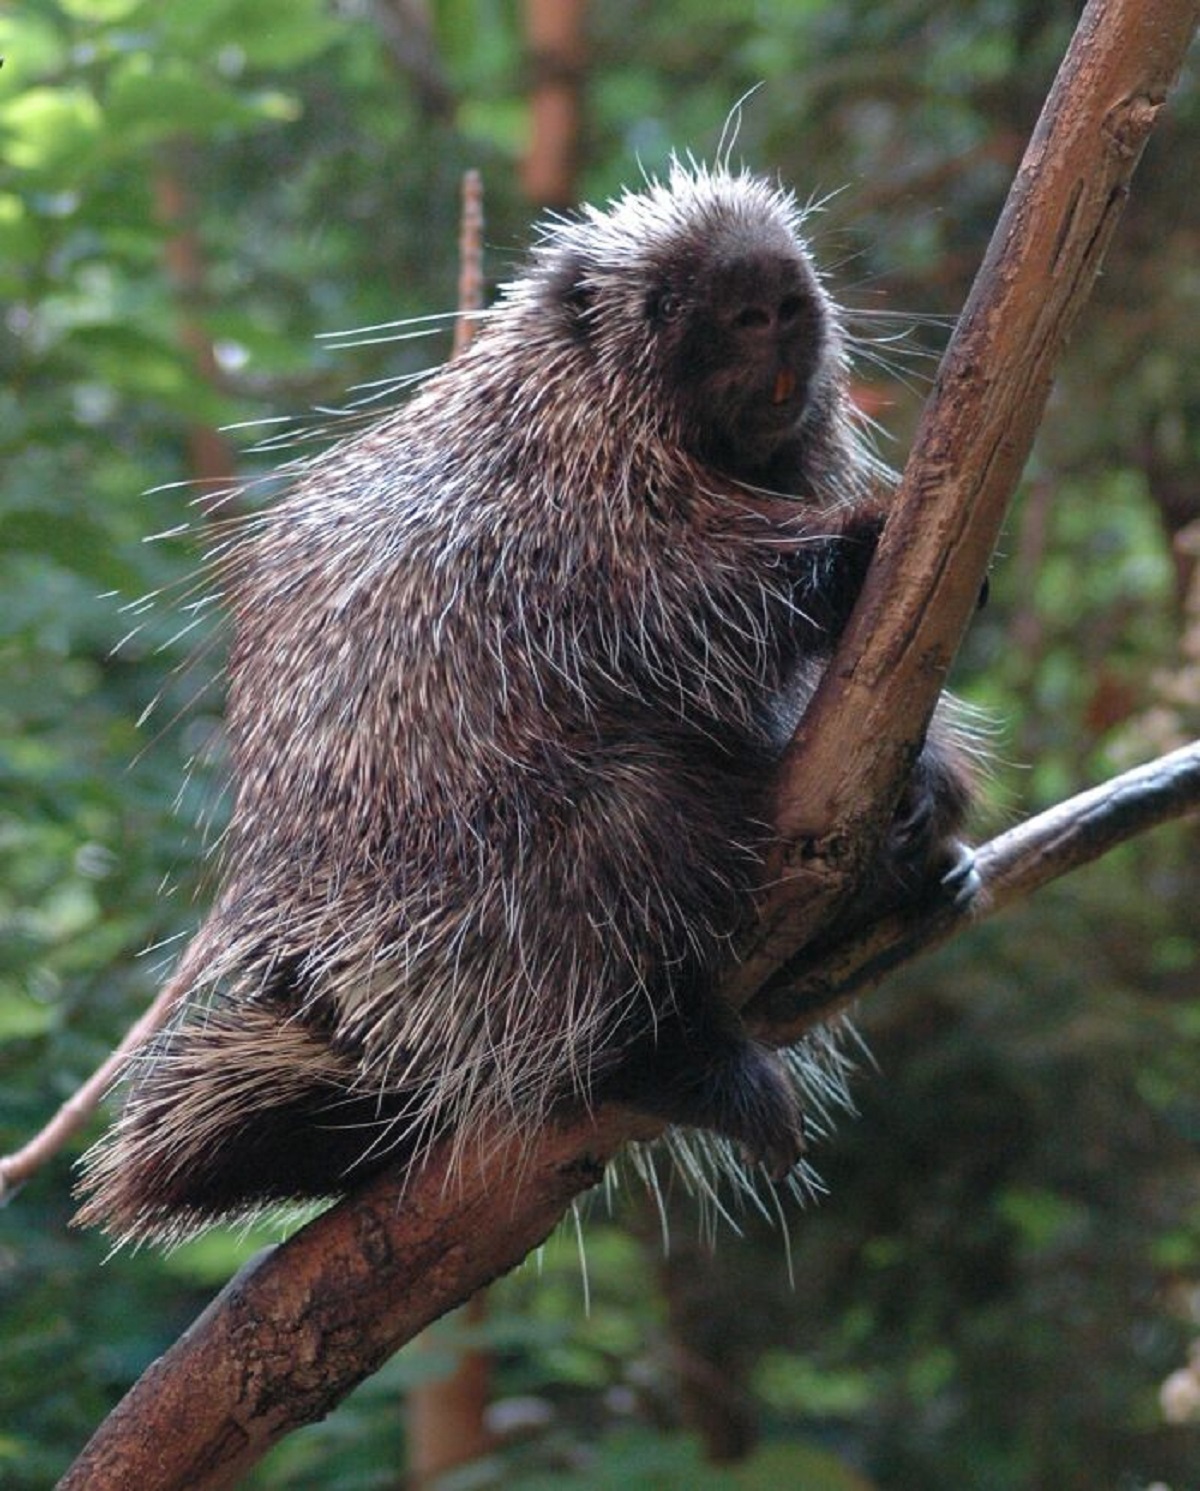 North American porcupines love salt and are known to eat backpackers’ road salt-covered boots left outside tents.